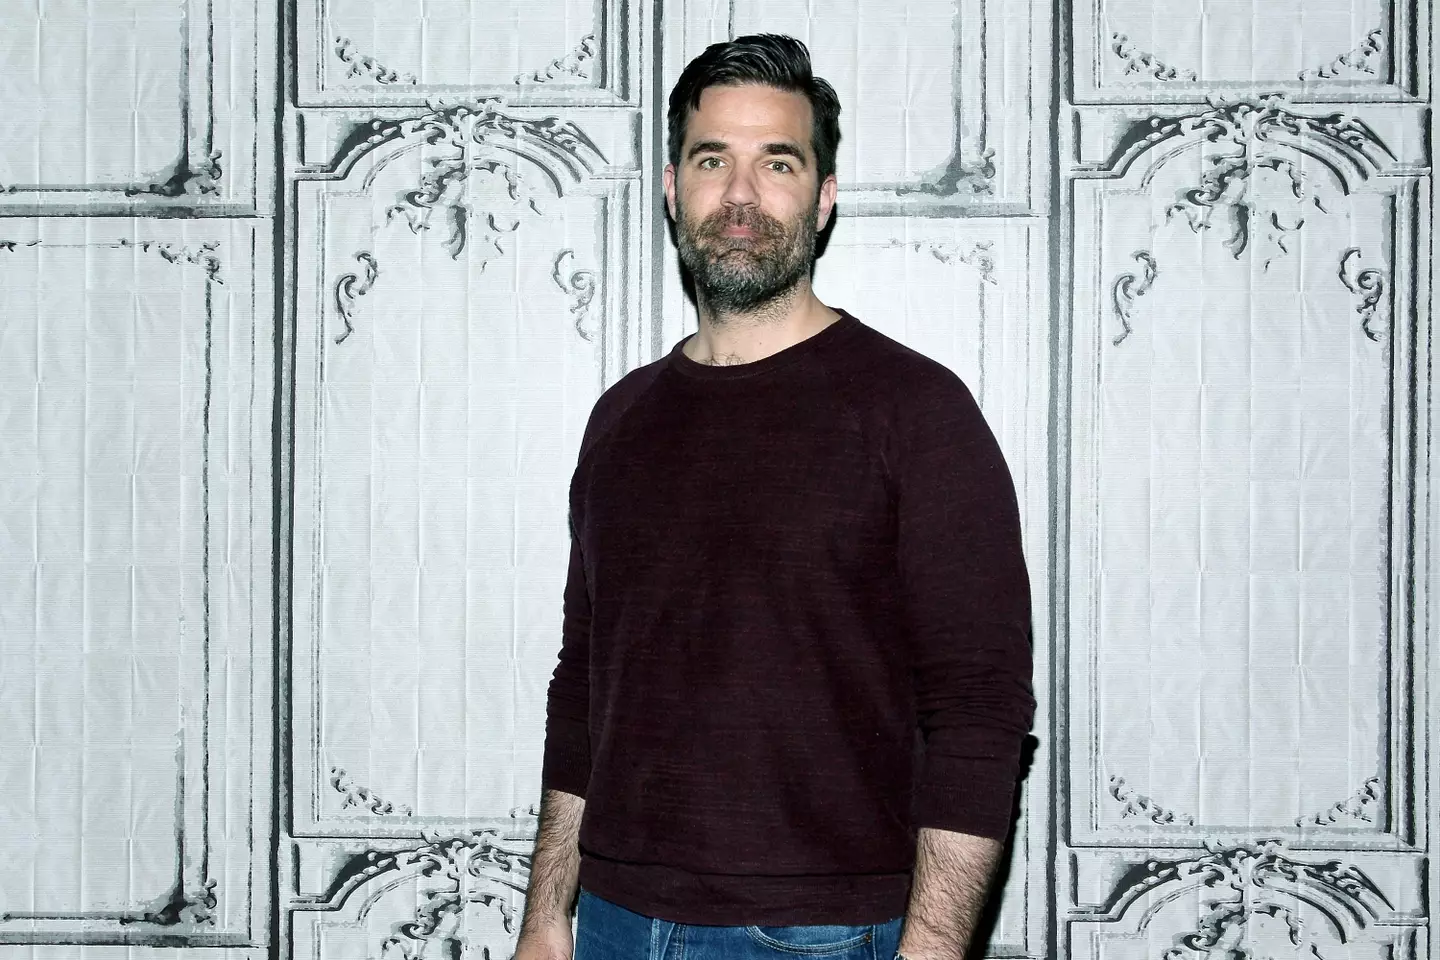 Rob Delaney has opened up about the pain of losing his two-year-old son, Henry.